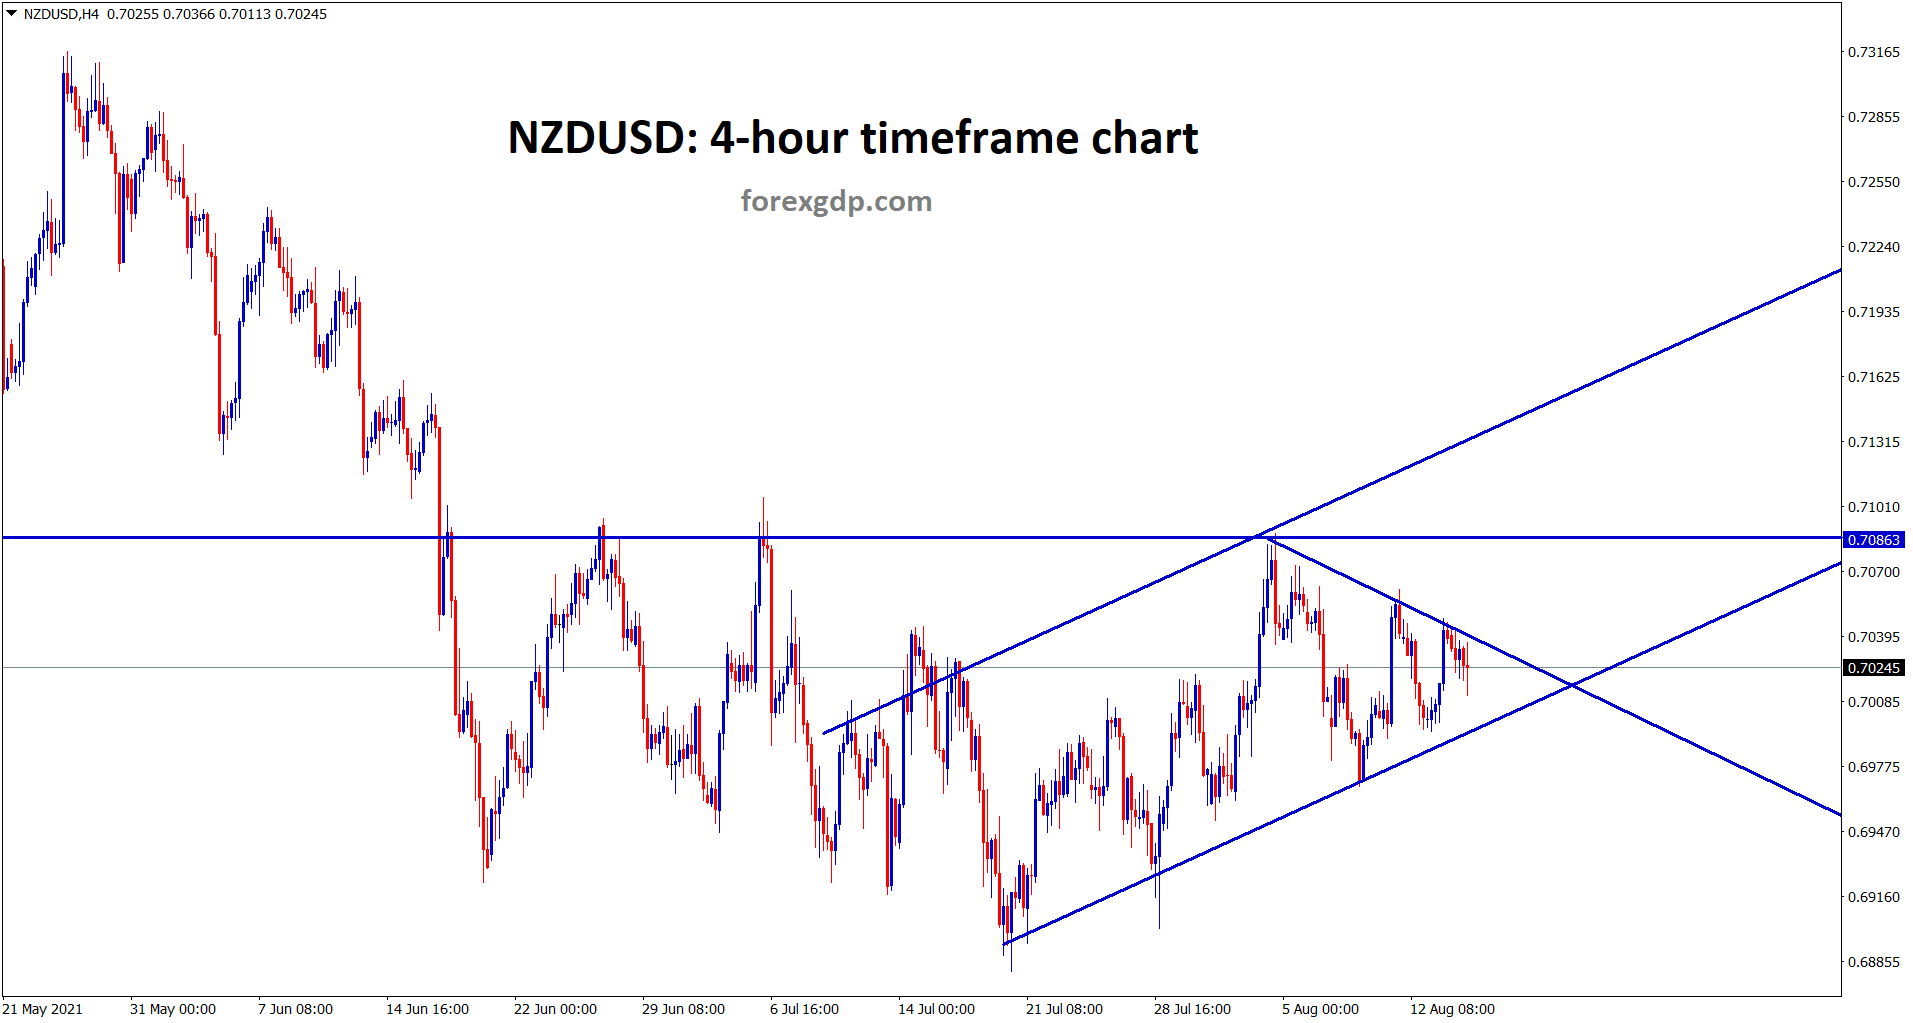 NZDUSD fallen from the resistance zone now going to break the minor symmetrical triangle pattern